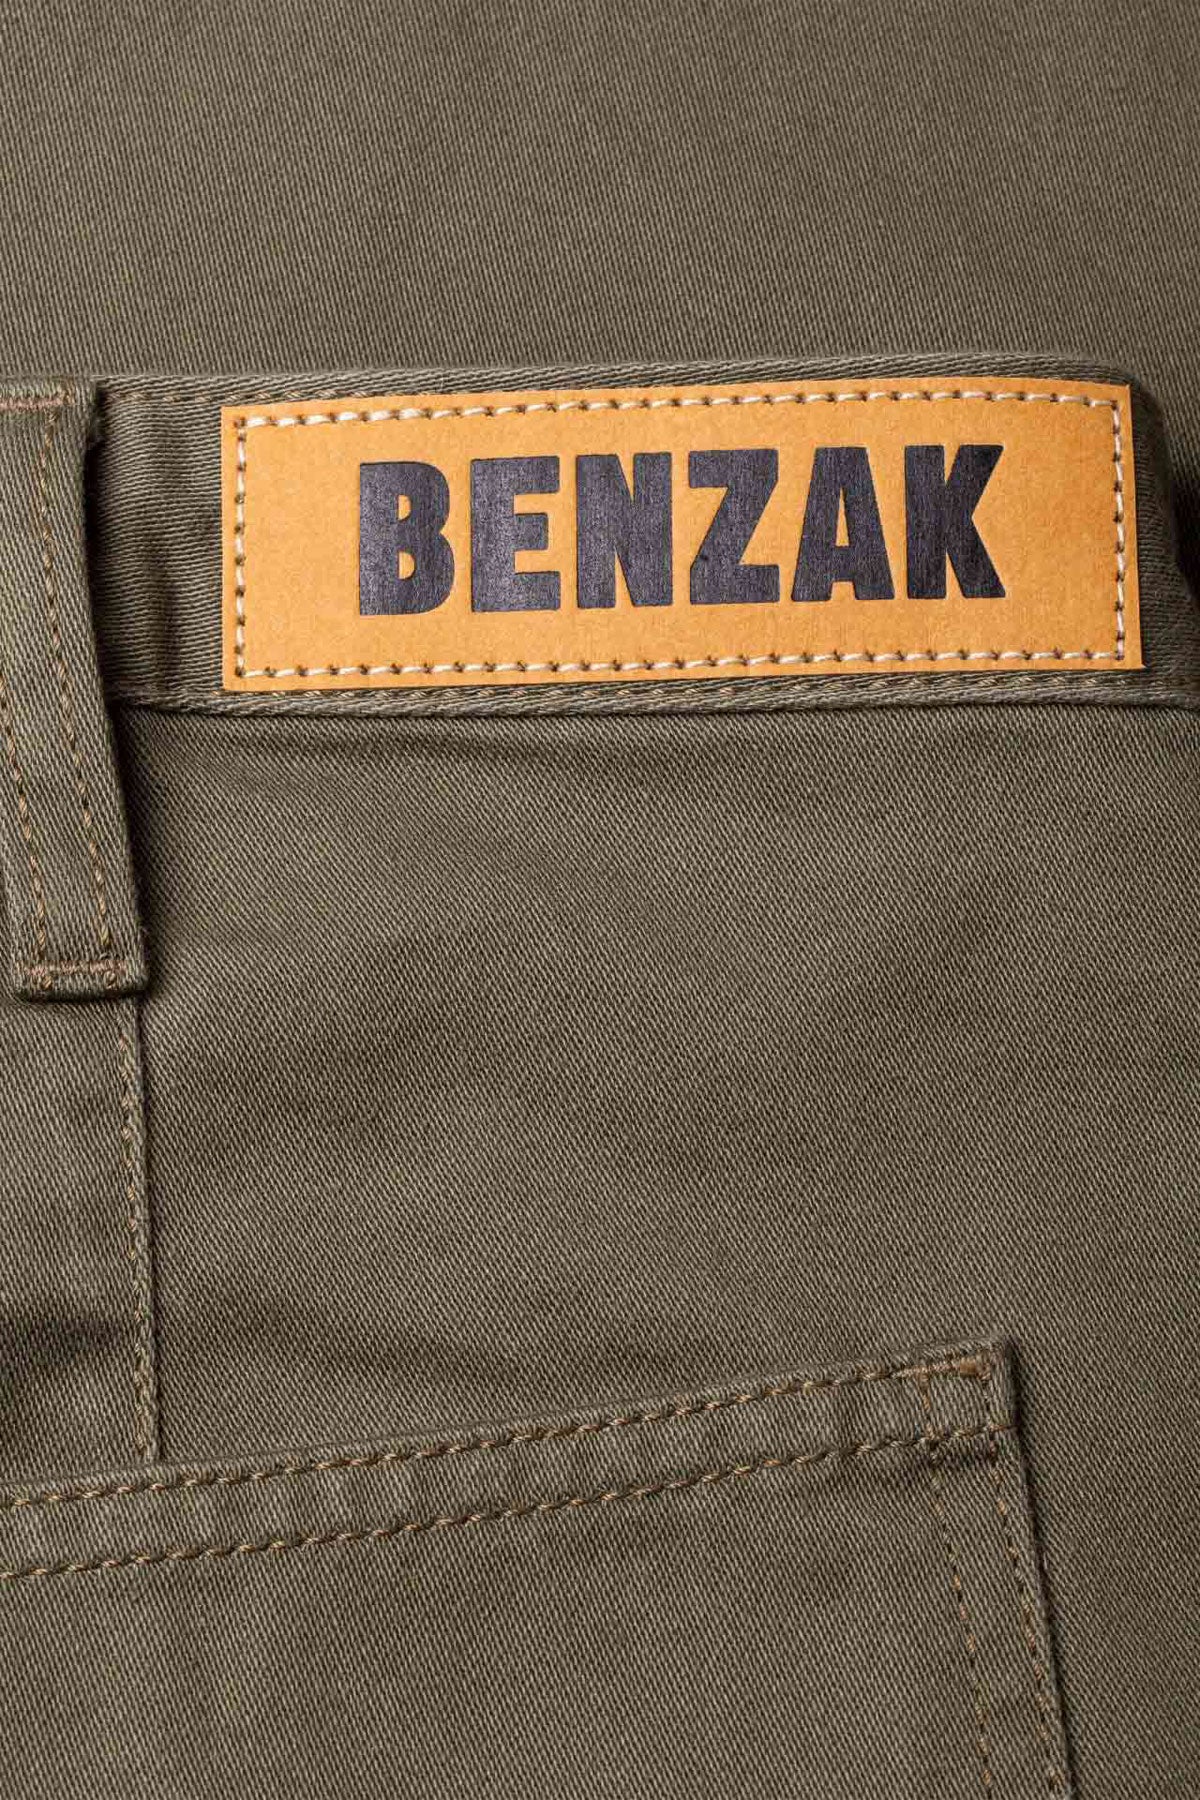 Benzak - BP-06 Scout Pants 9.5 oz. olive green military sateen